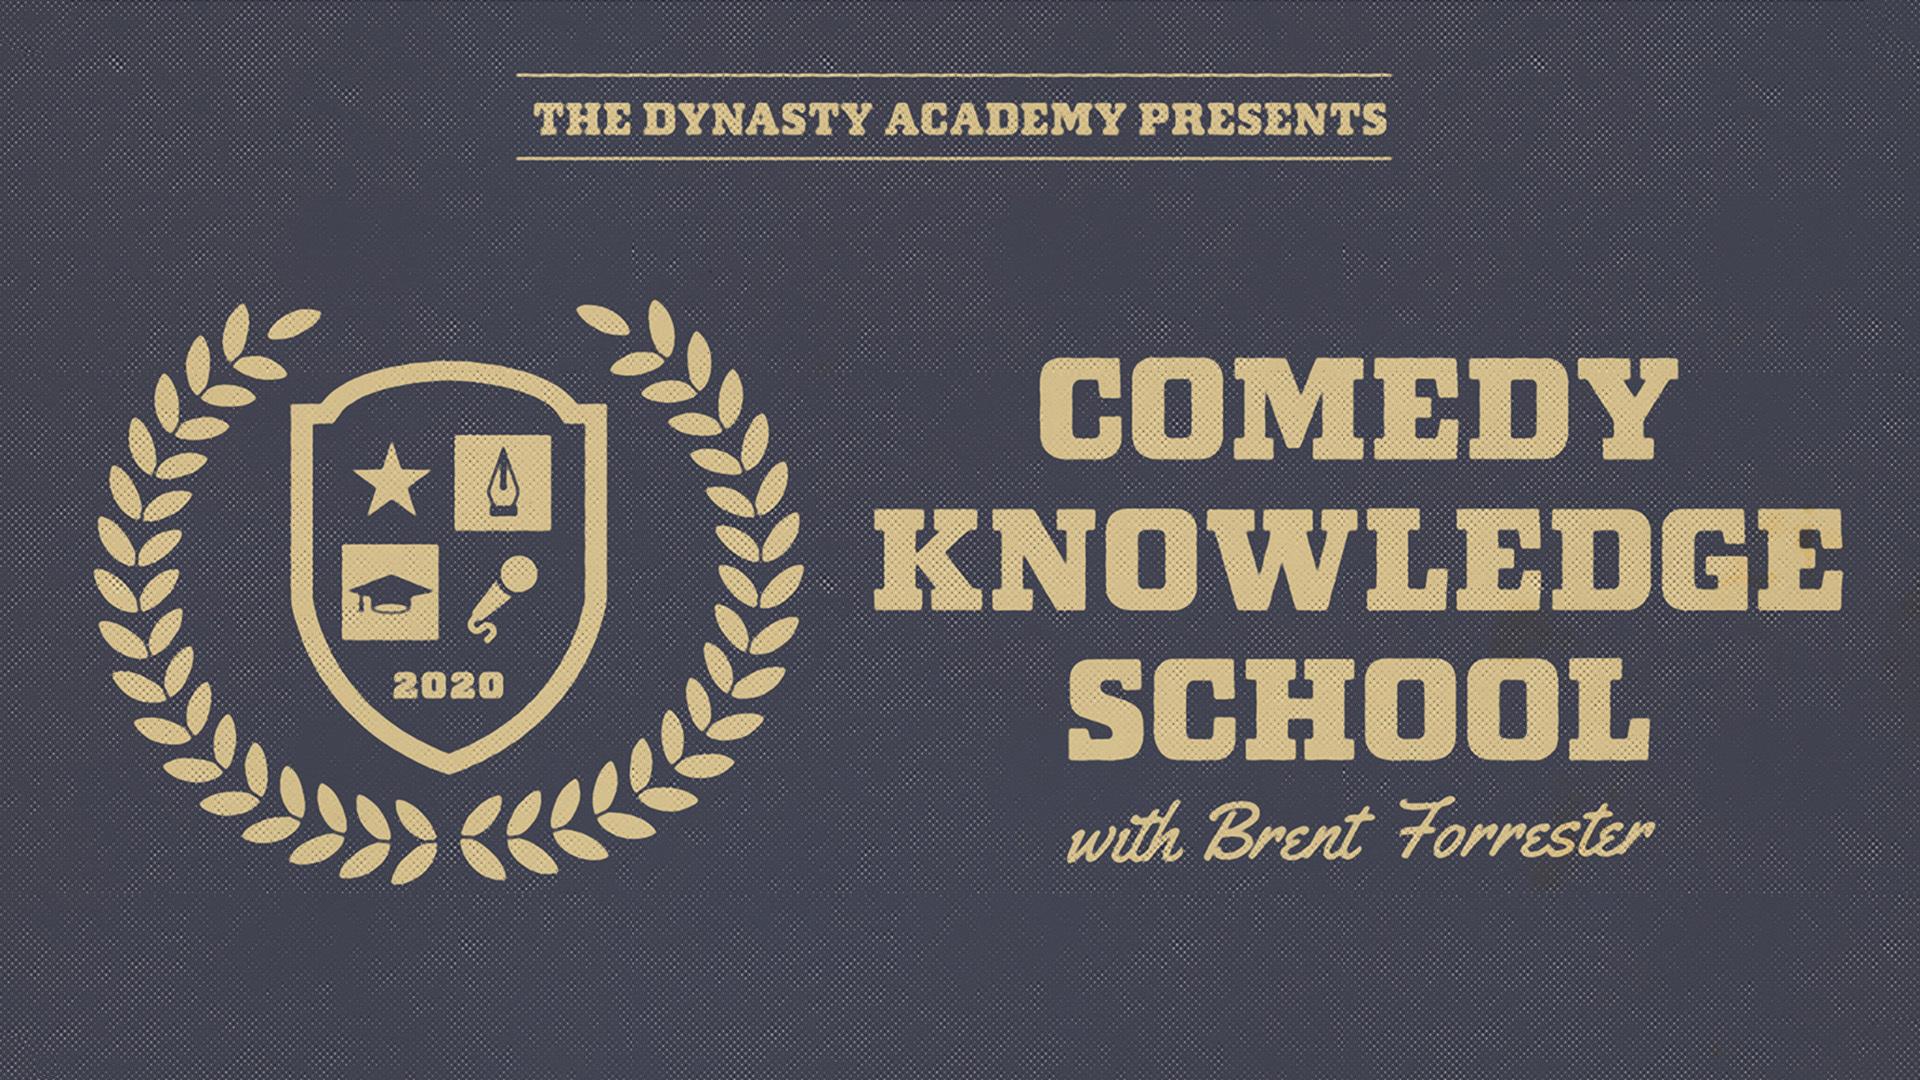 Comedy Knowledge School w/ Brent Forrester!